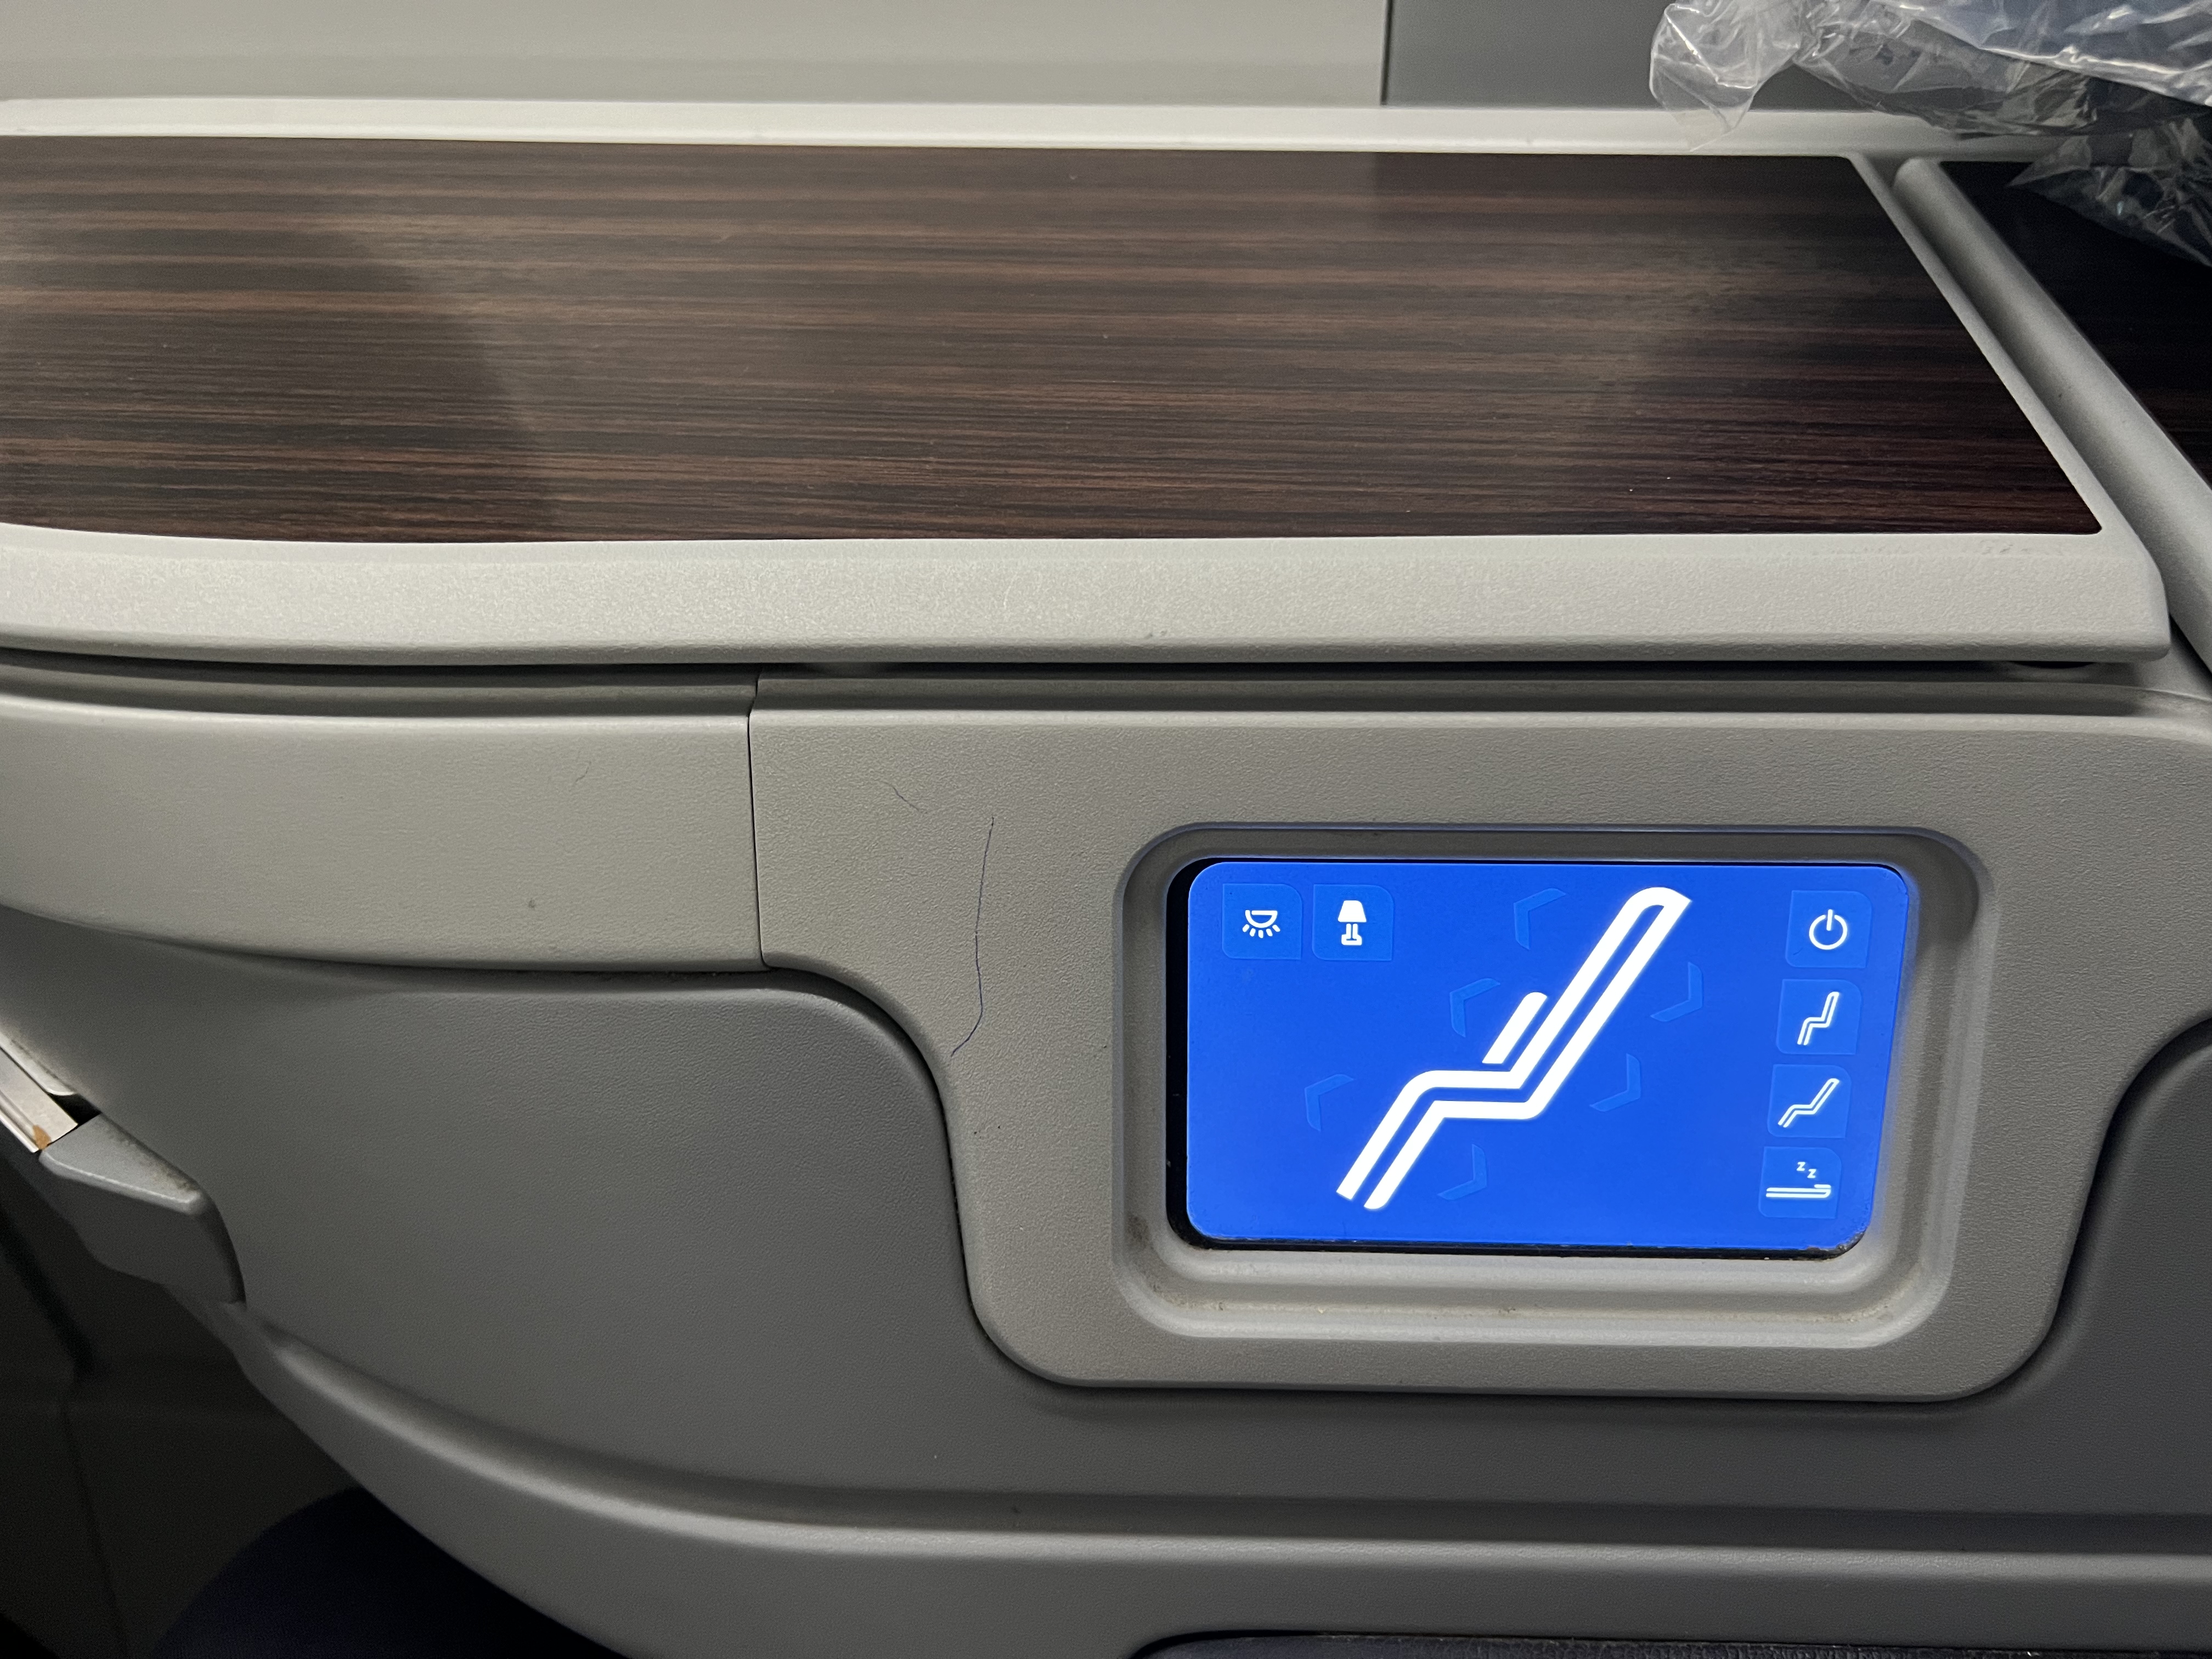  MS958 CAI-CAN - Business Class B789